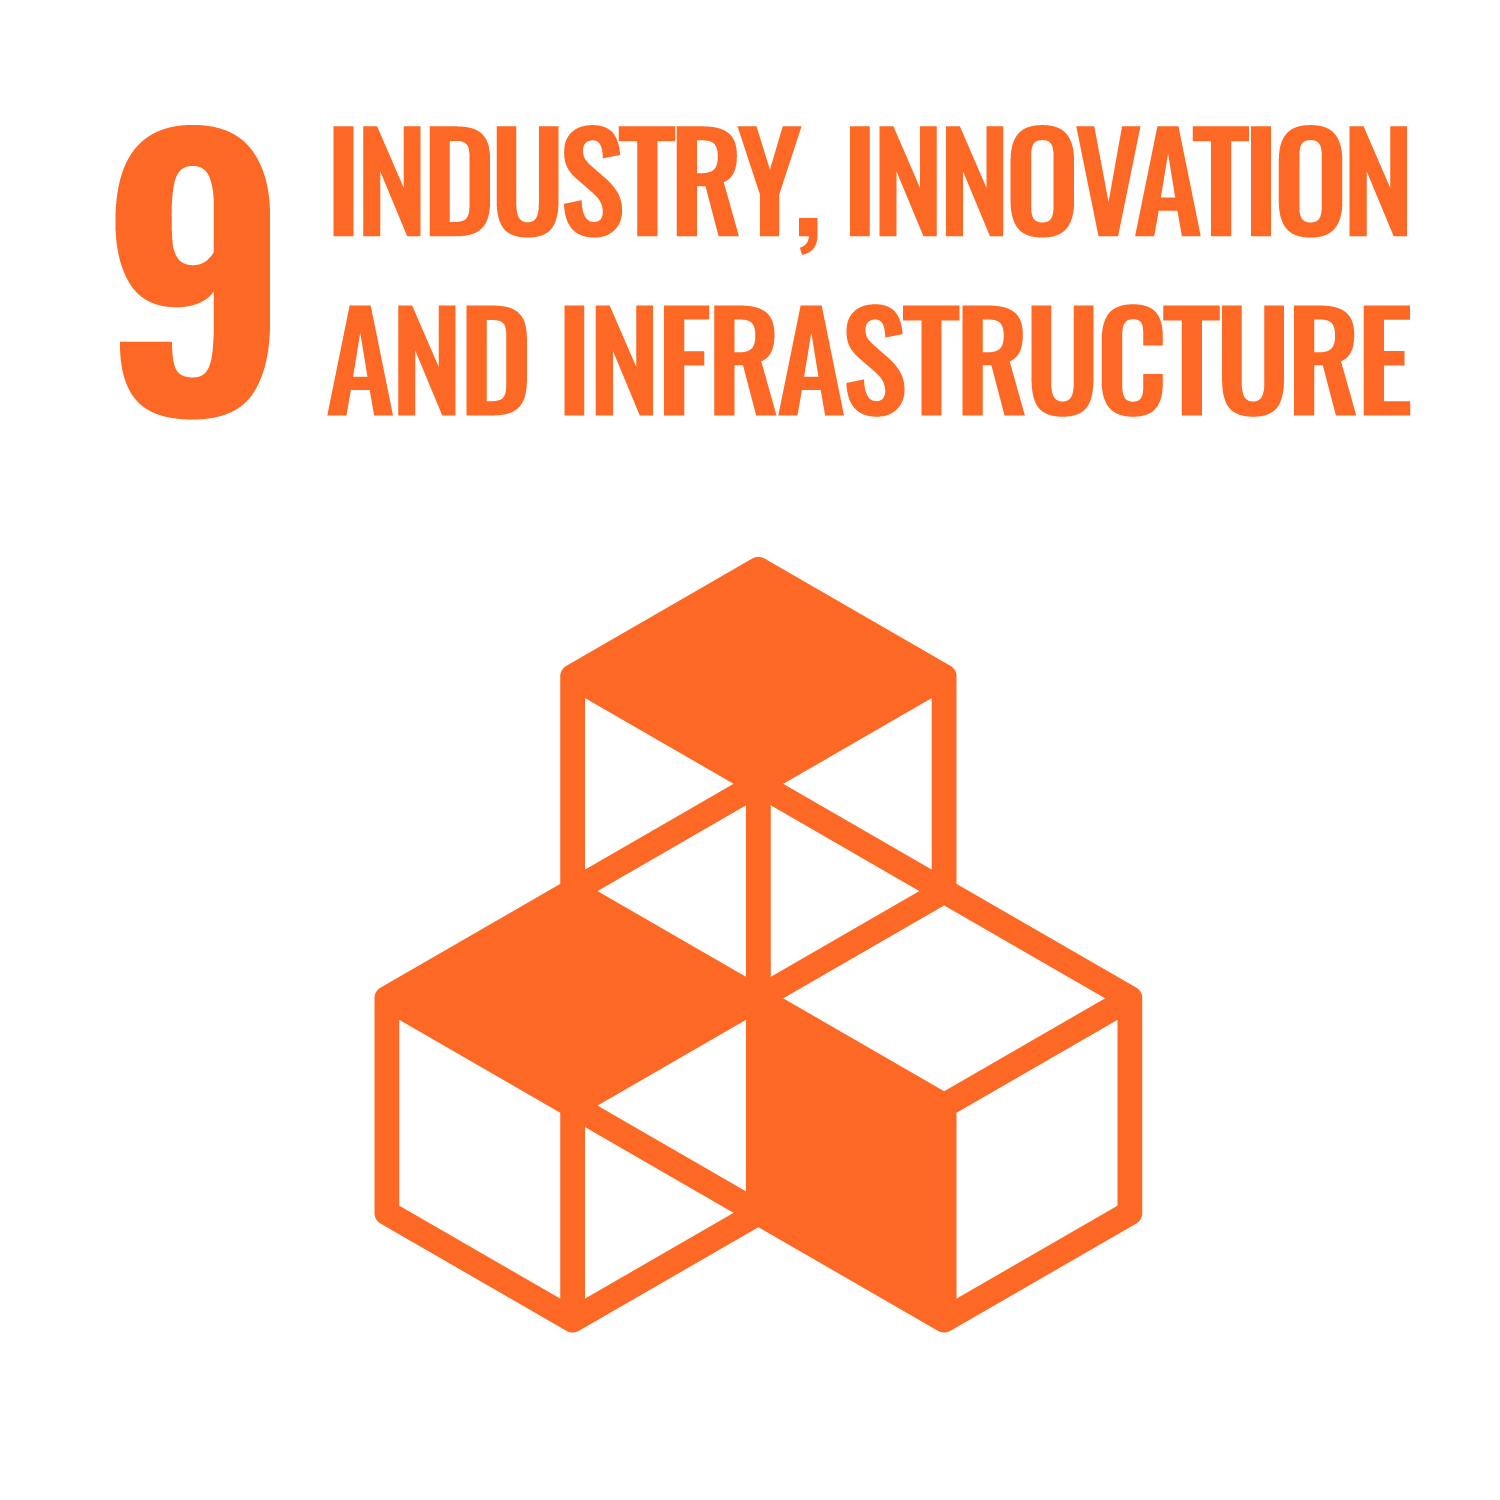 SDG 9 - Industry, Innovation and Infrastructure